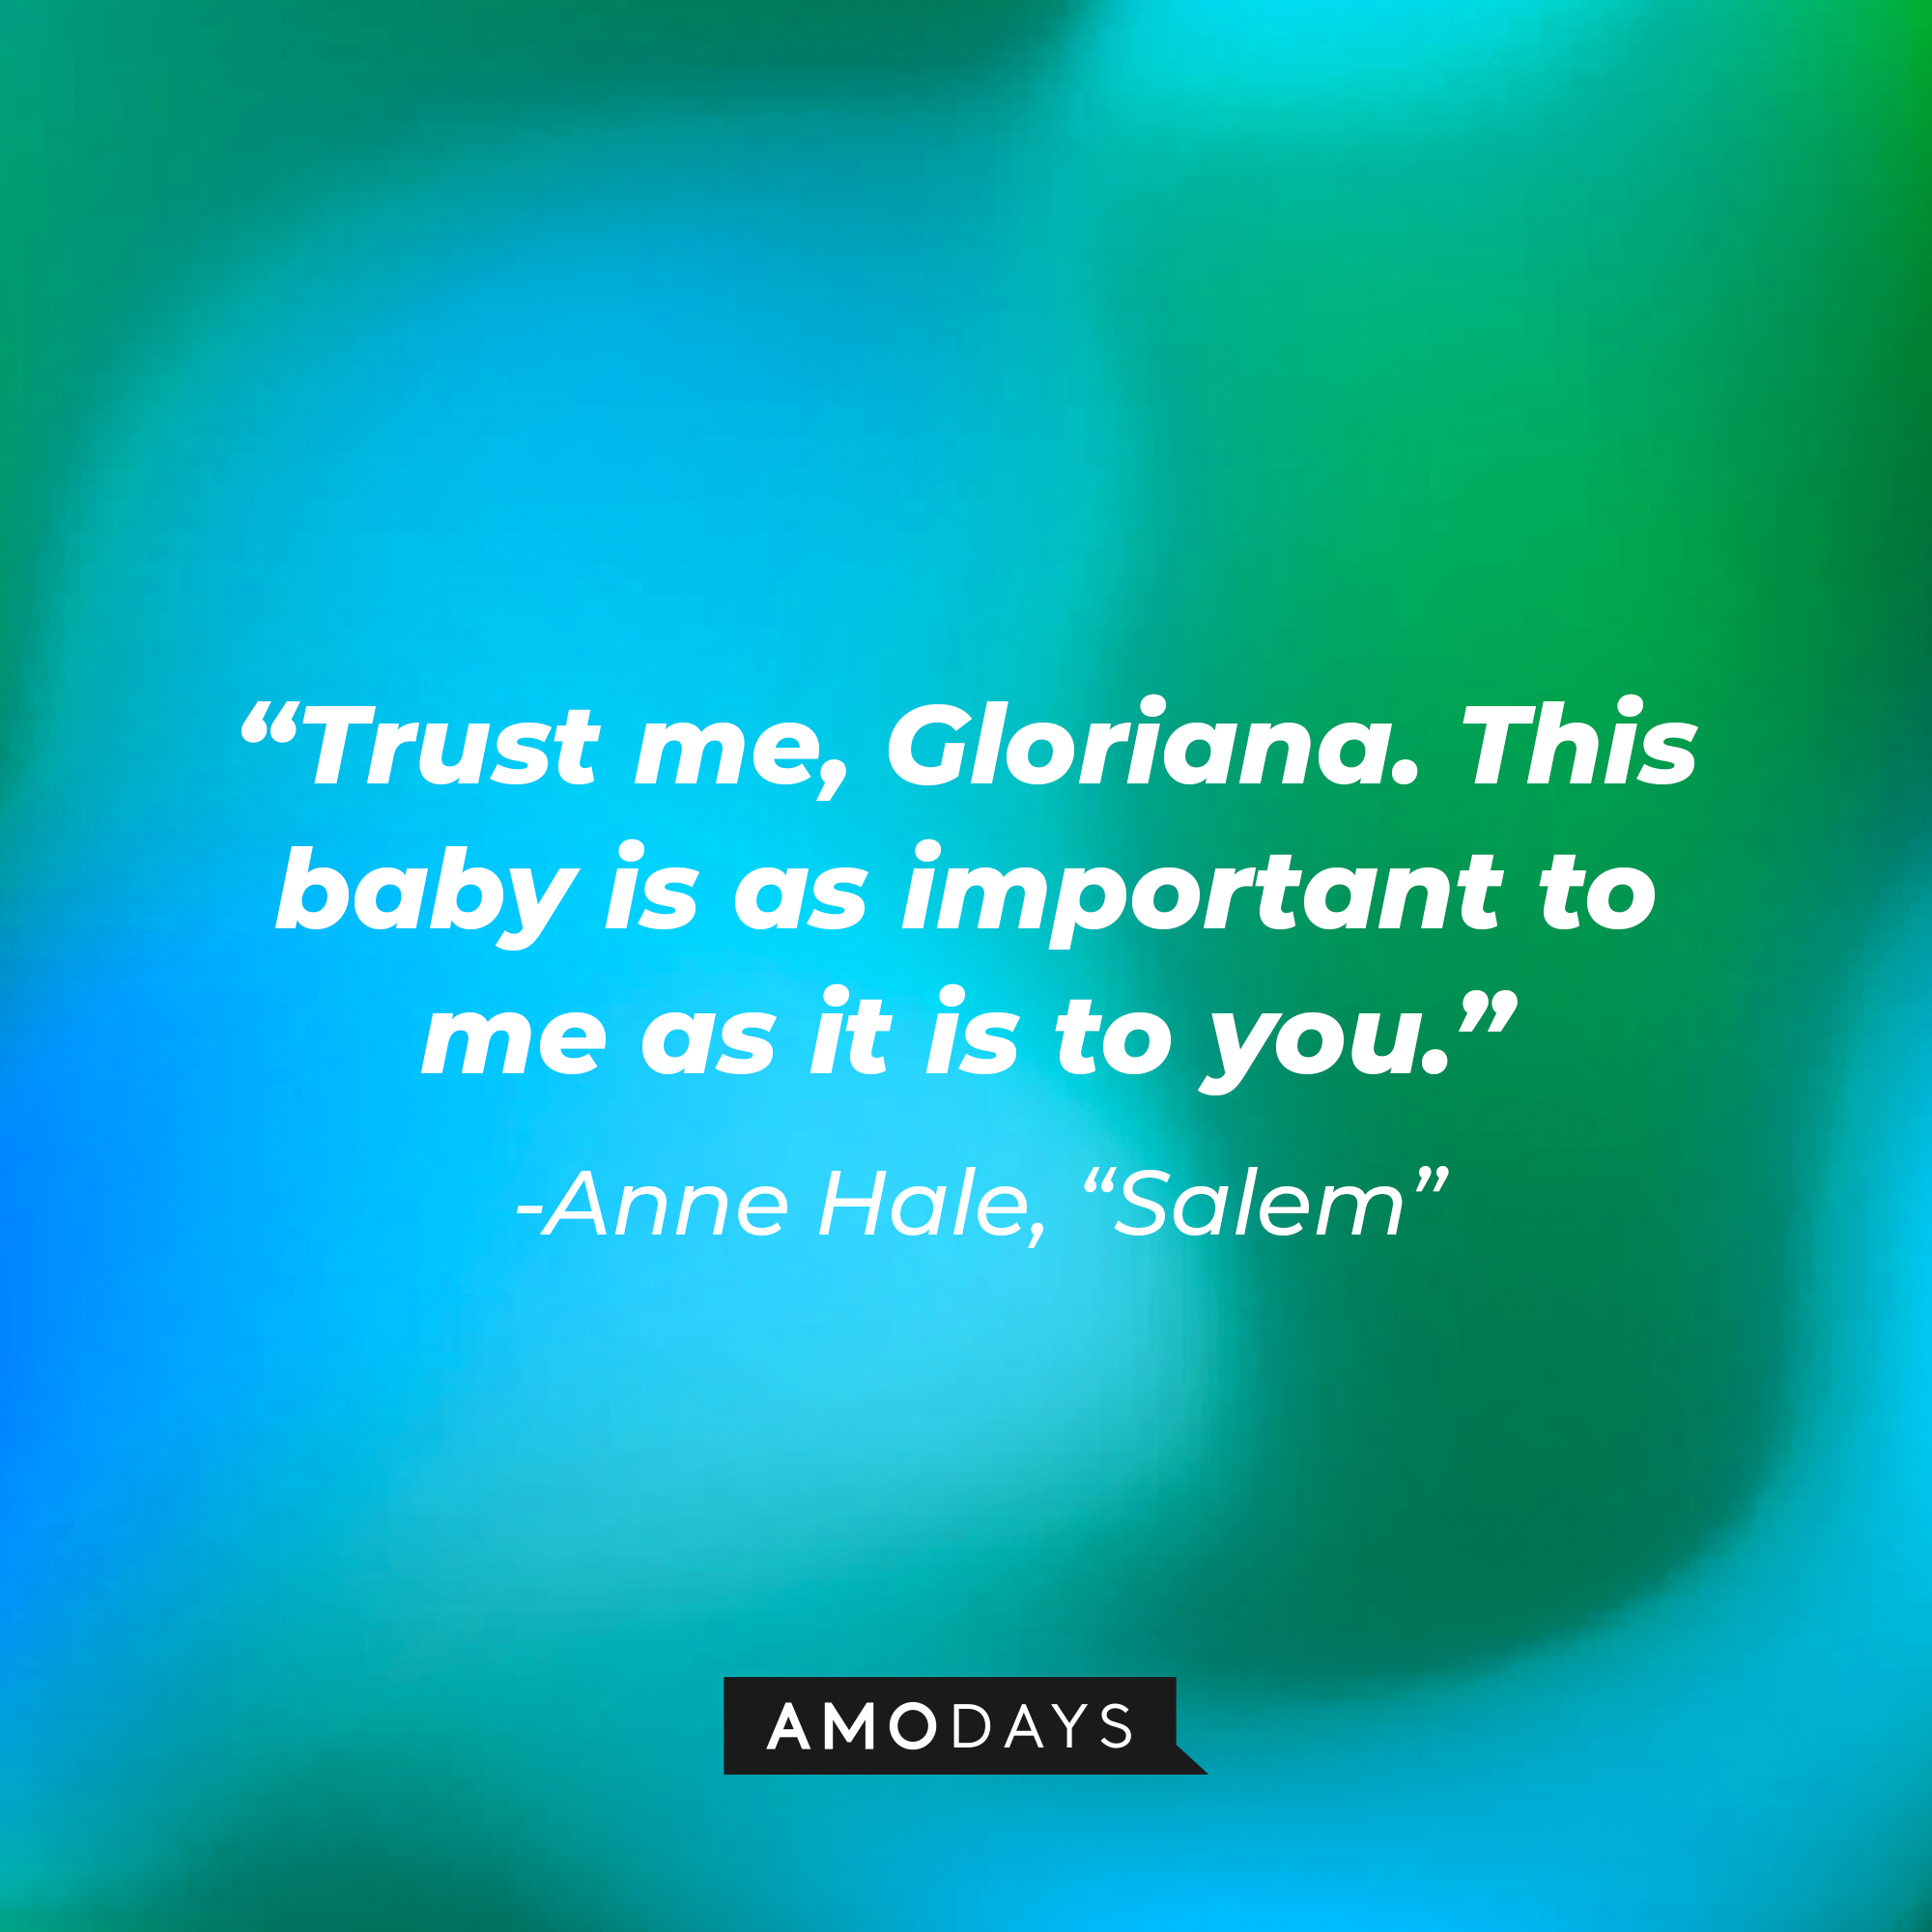 Anne Hale's quote: "Trust me, Gloriana. This baby is as important to me as it is to you." | Source: Amodays